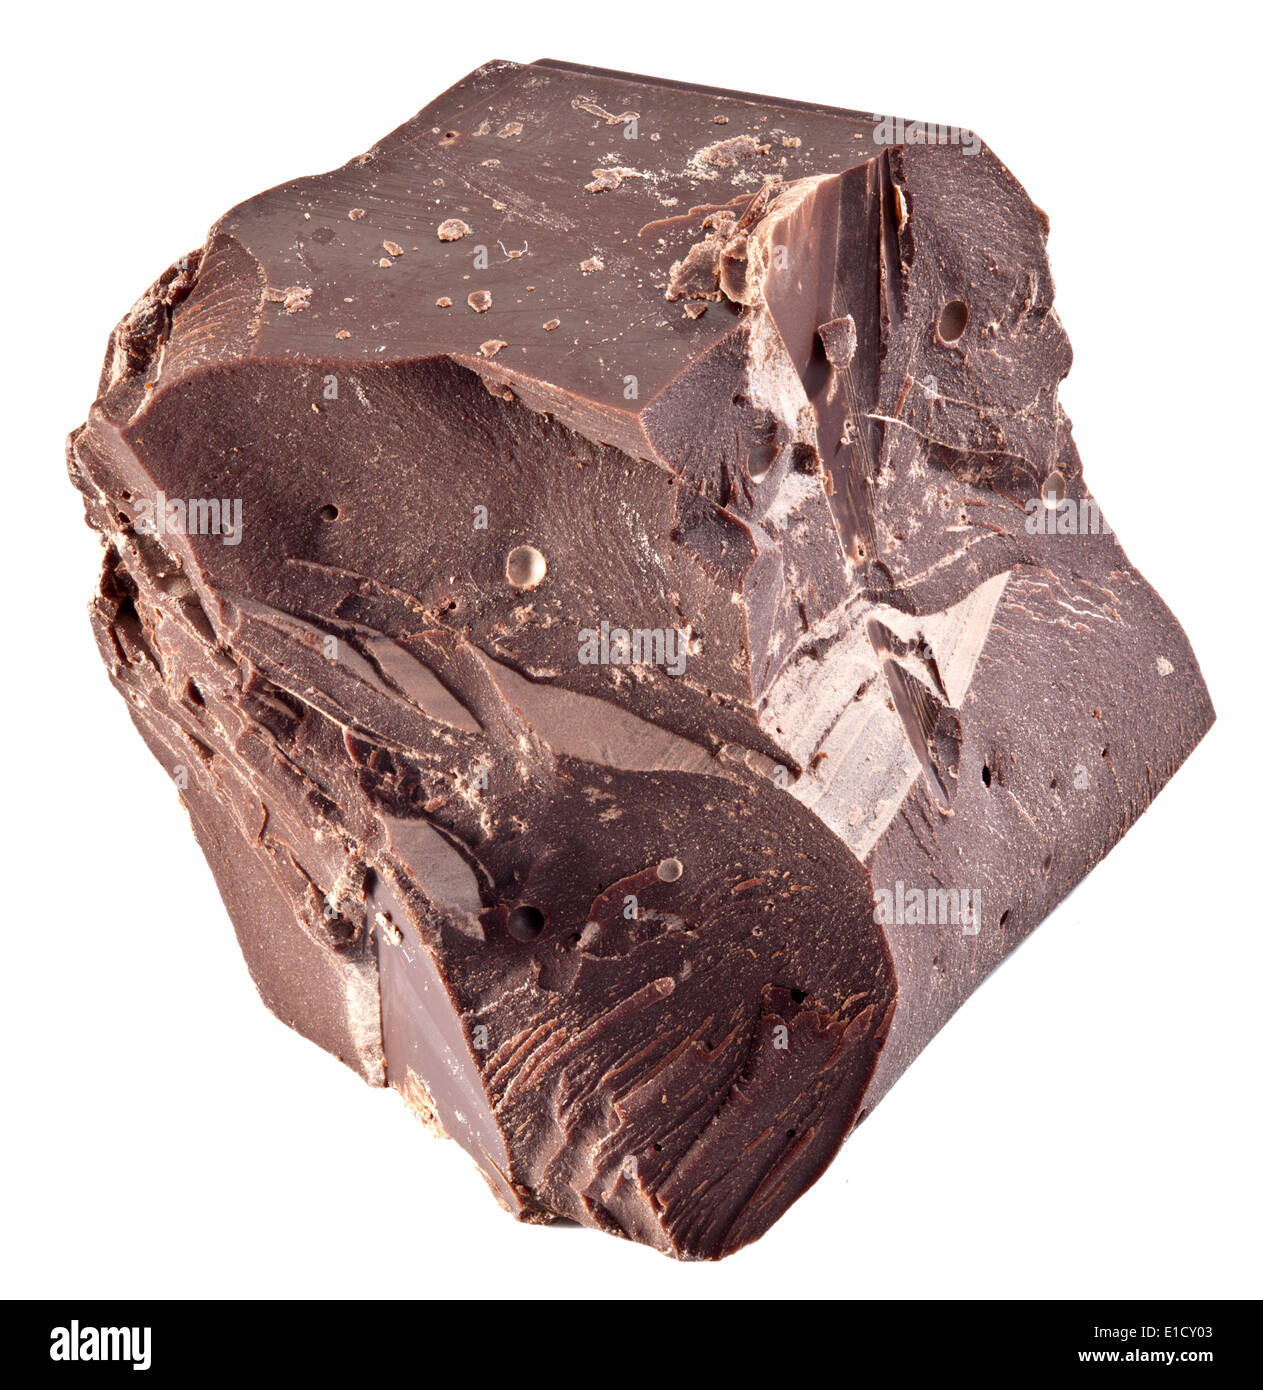 One chocolate block isolated on a white background. Stock Photo